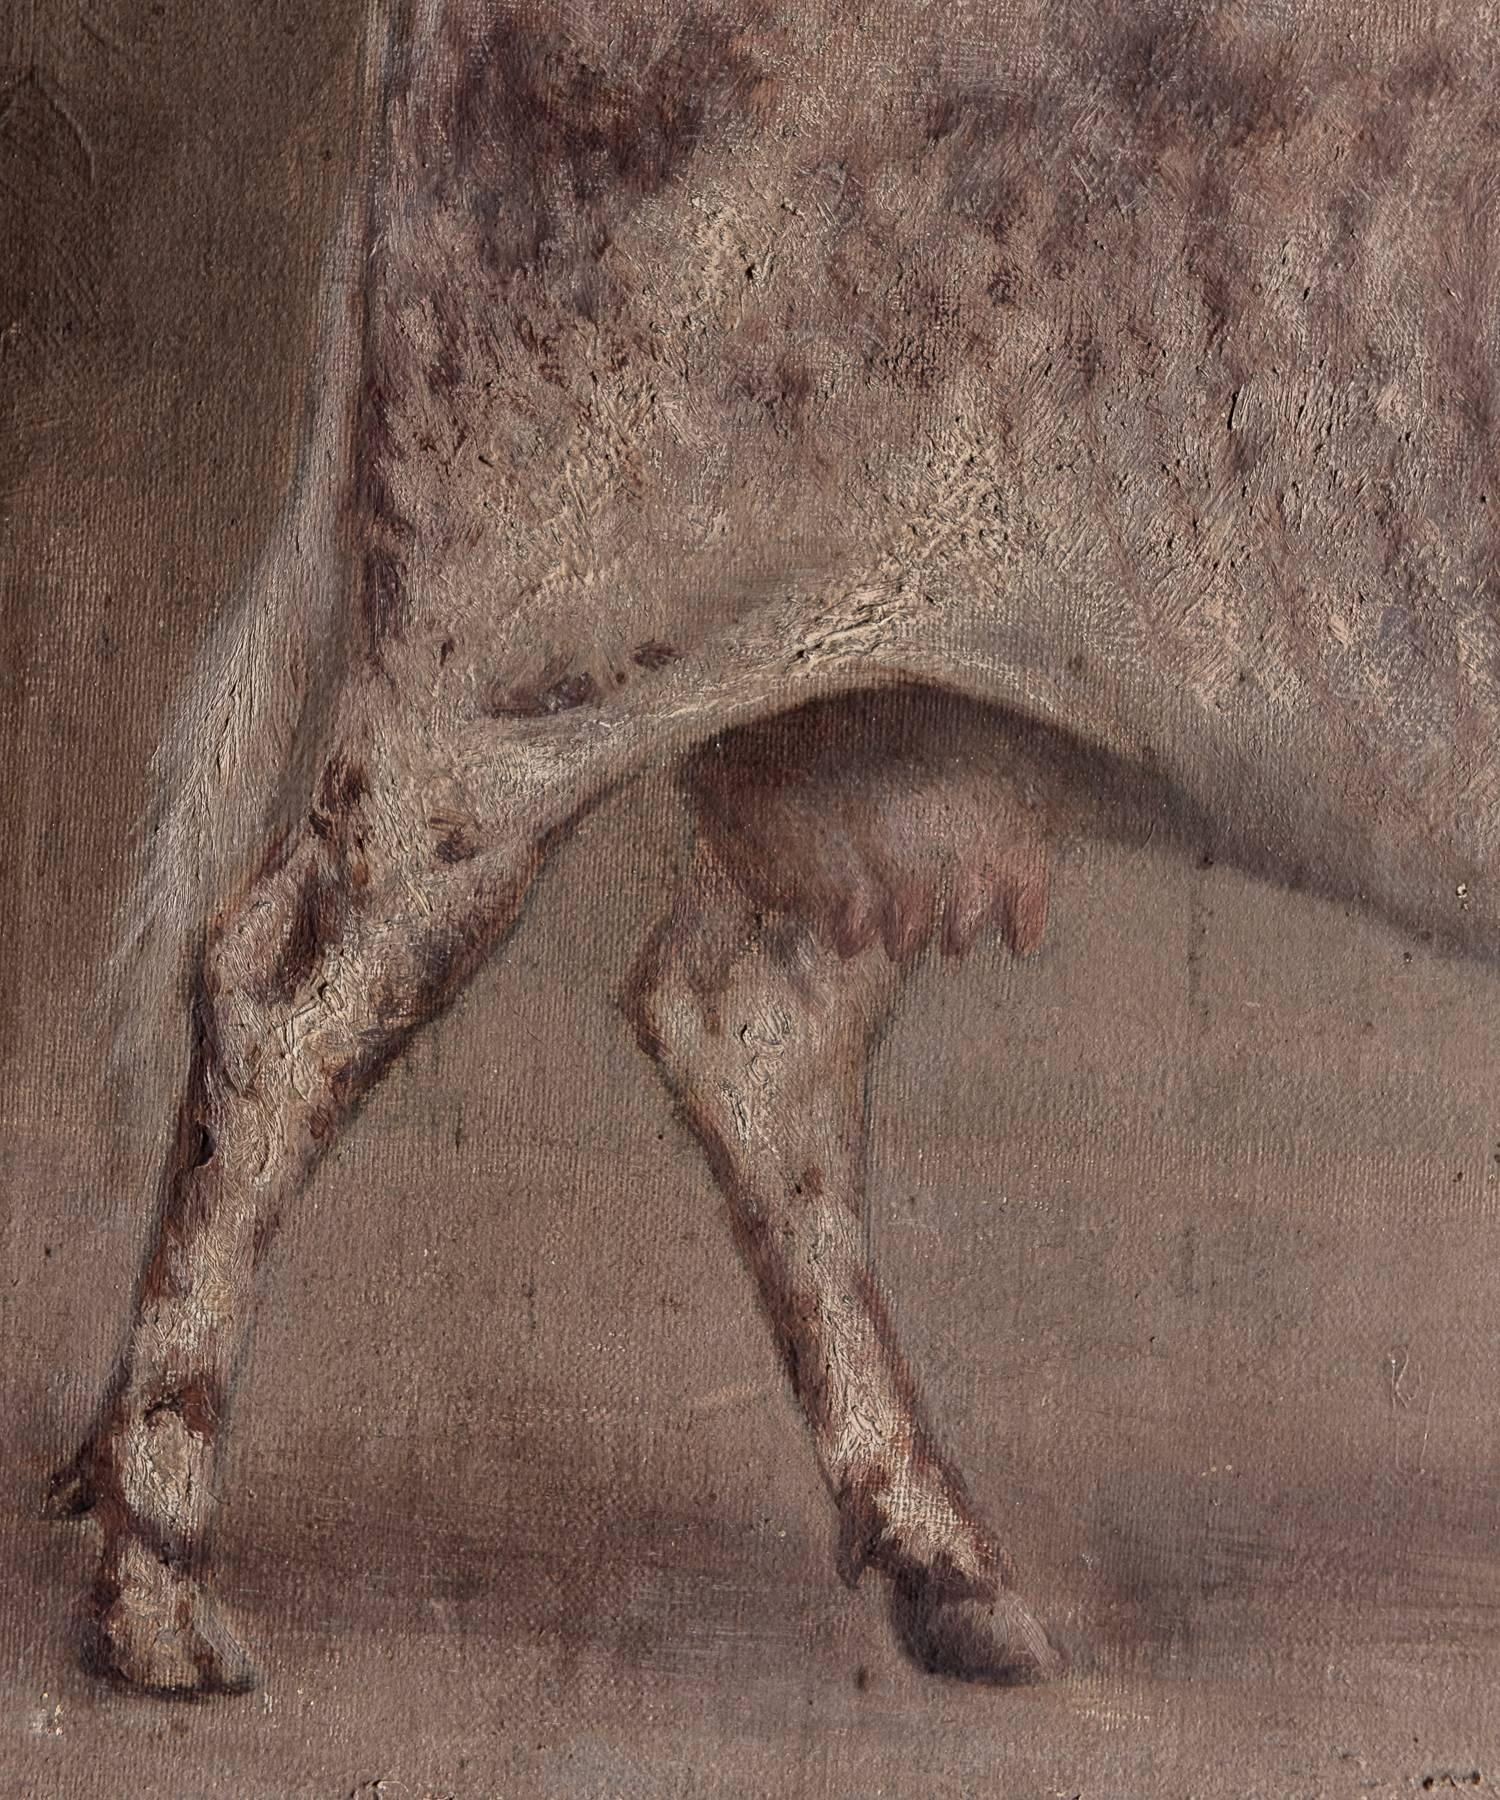 Hand-Painted Oil Painting of a Cow, 1903